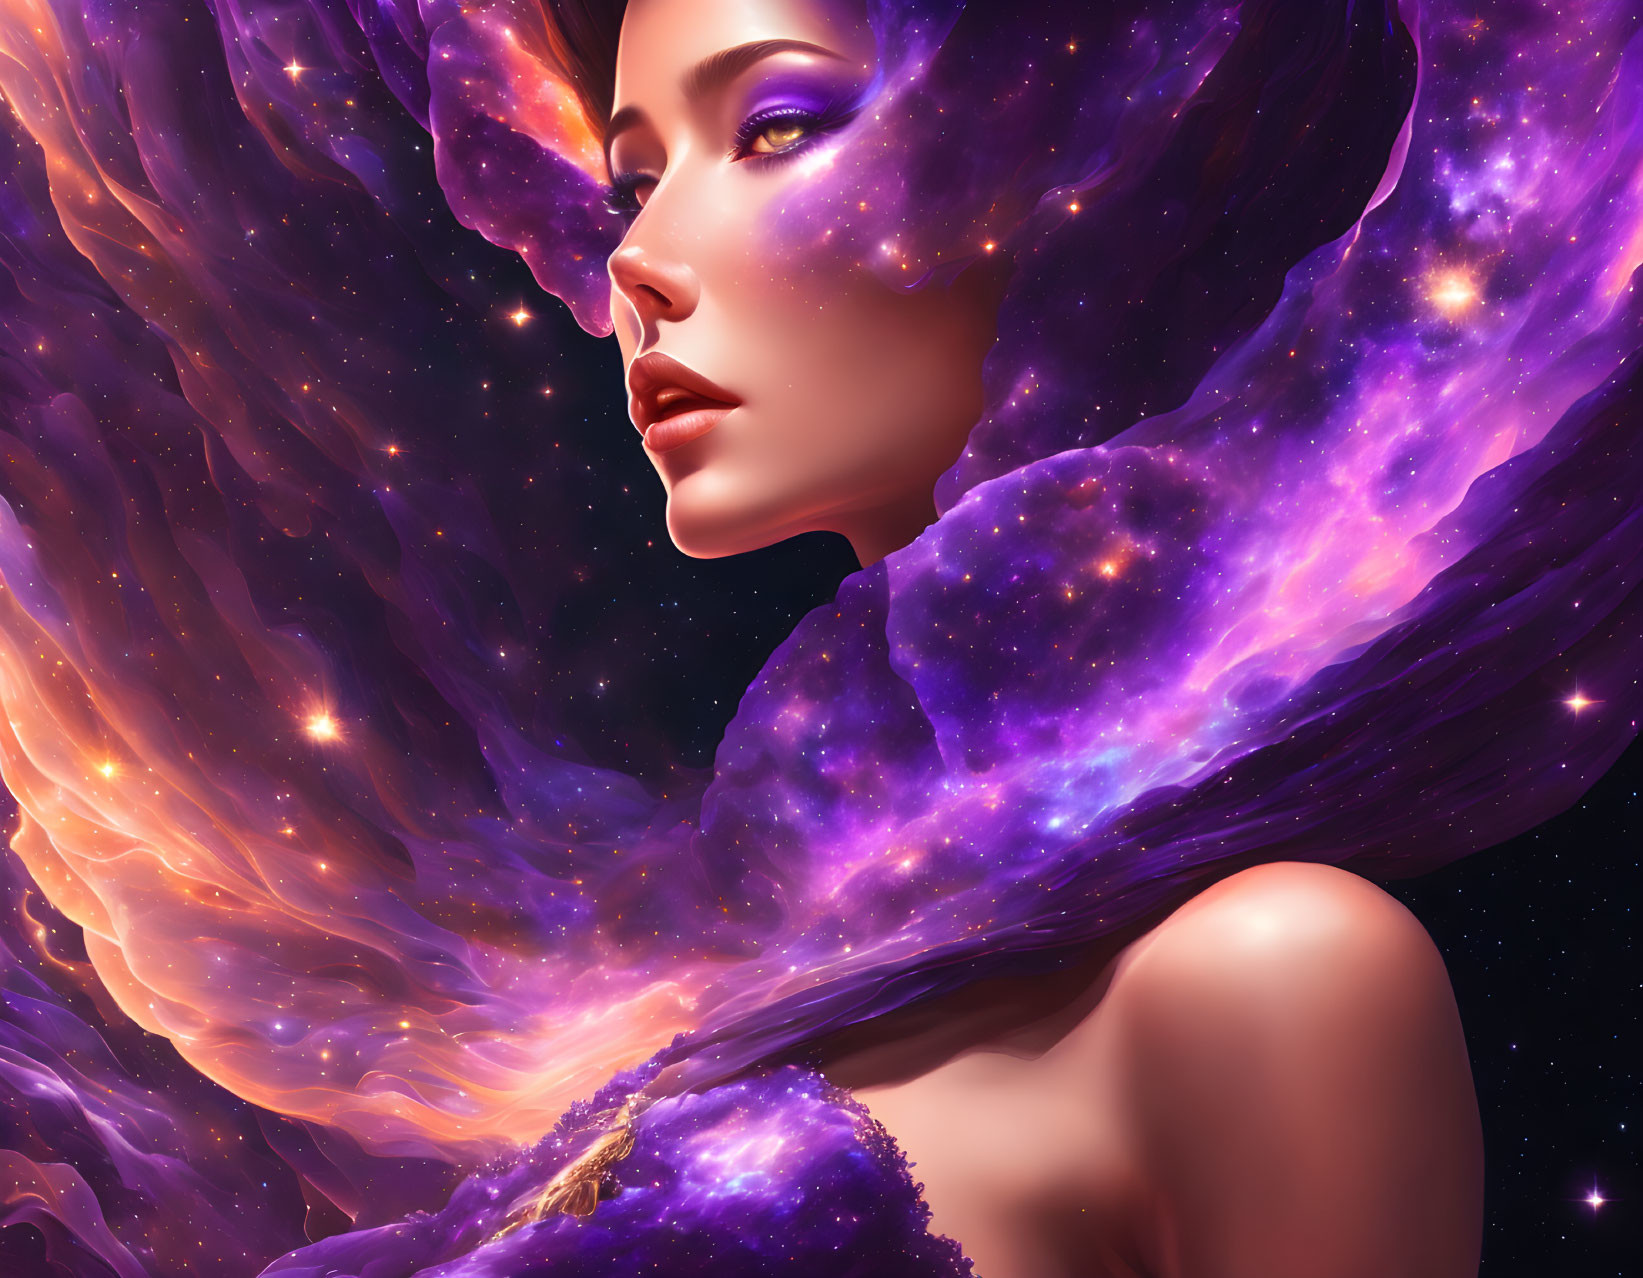 Cosmic woman with star-filled hair in space scene